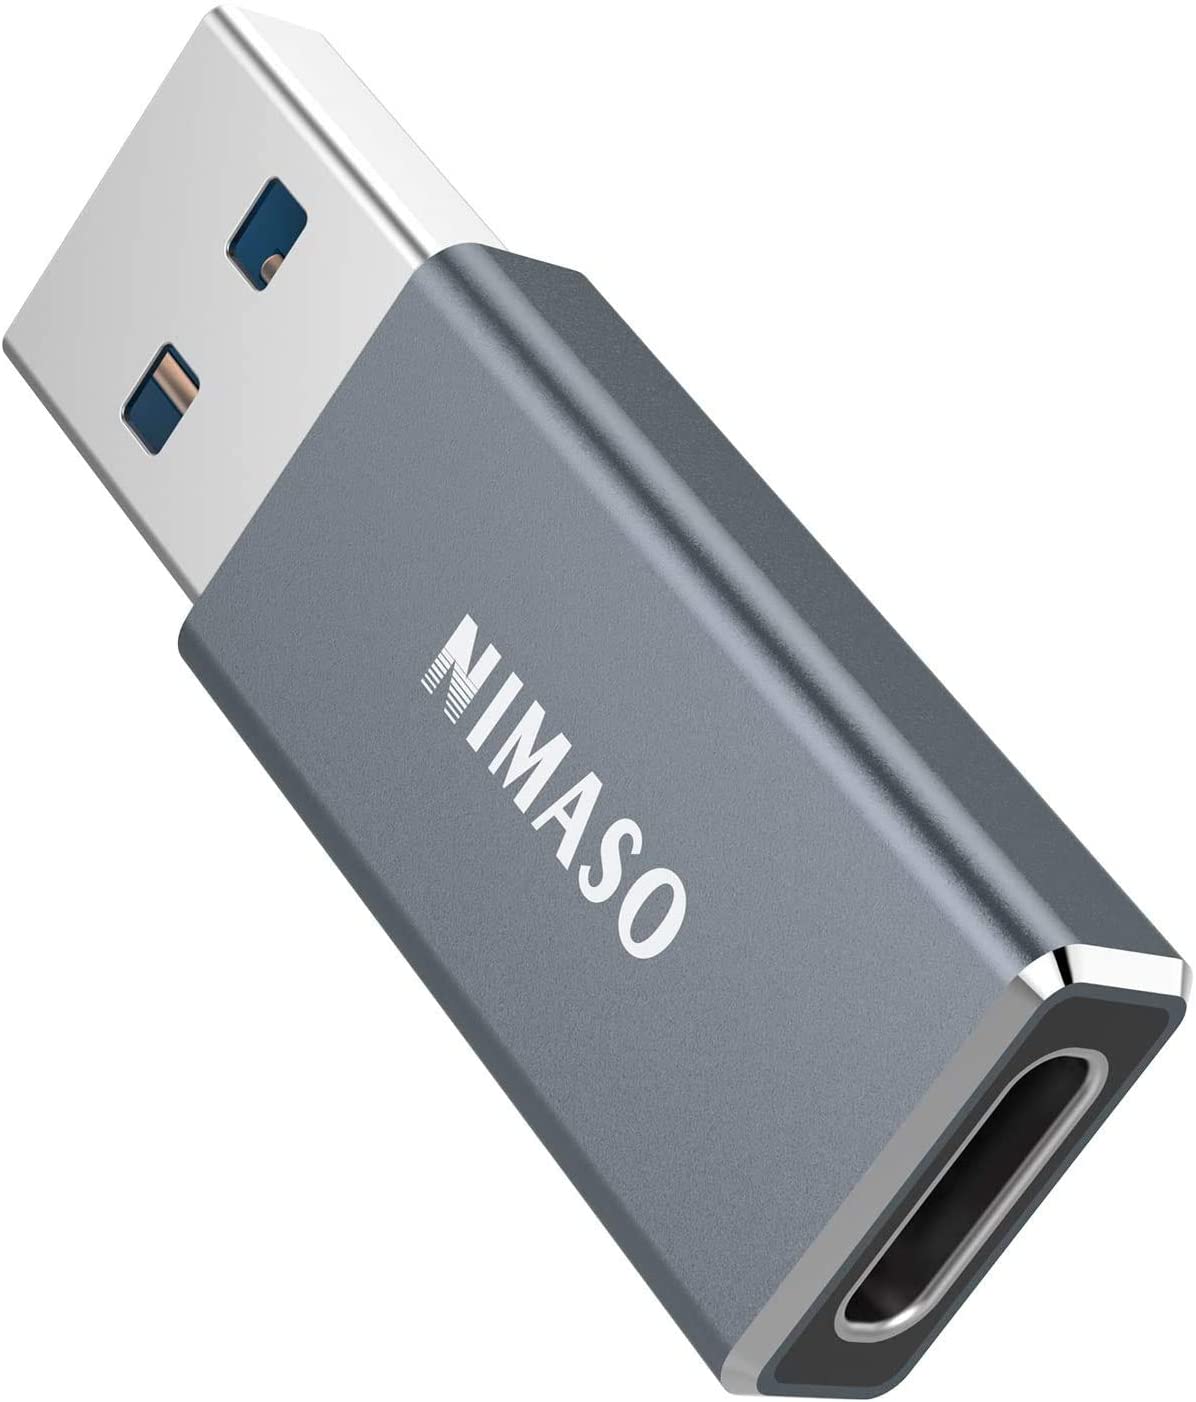 USB C Female to USB Male Adapter 5Gbps,NIMASO Type C to USB A Charger Cable Adapter.